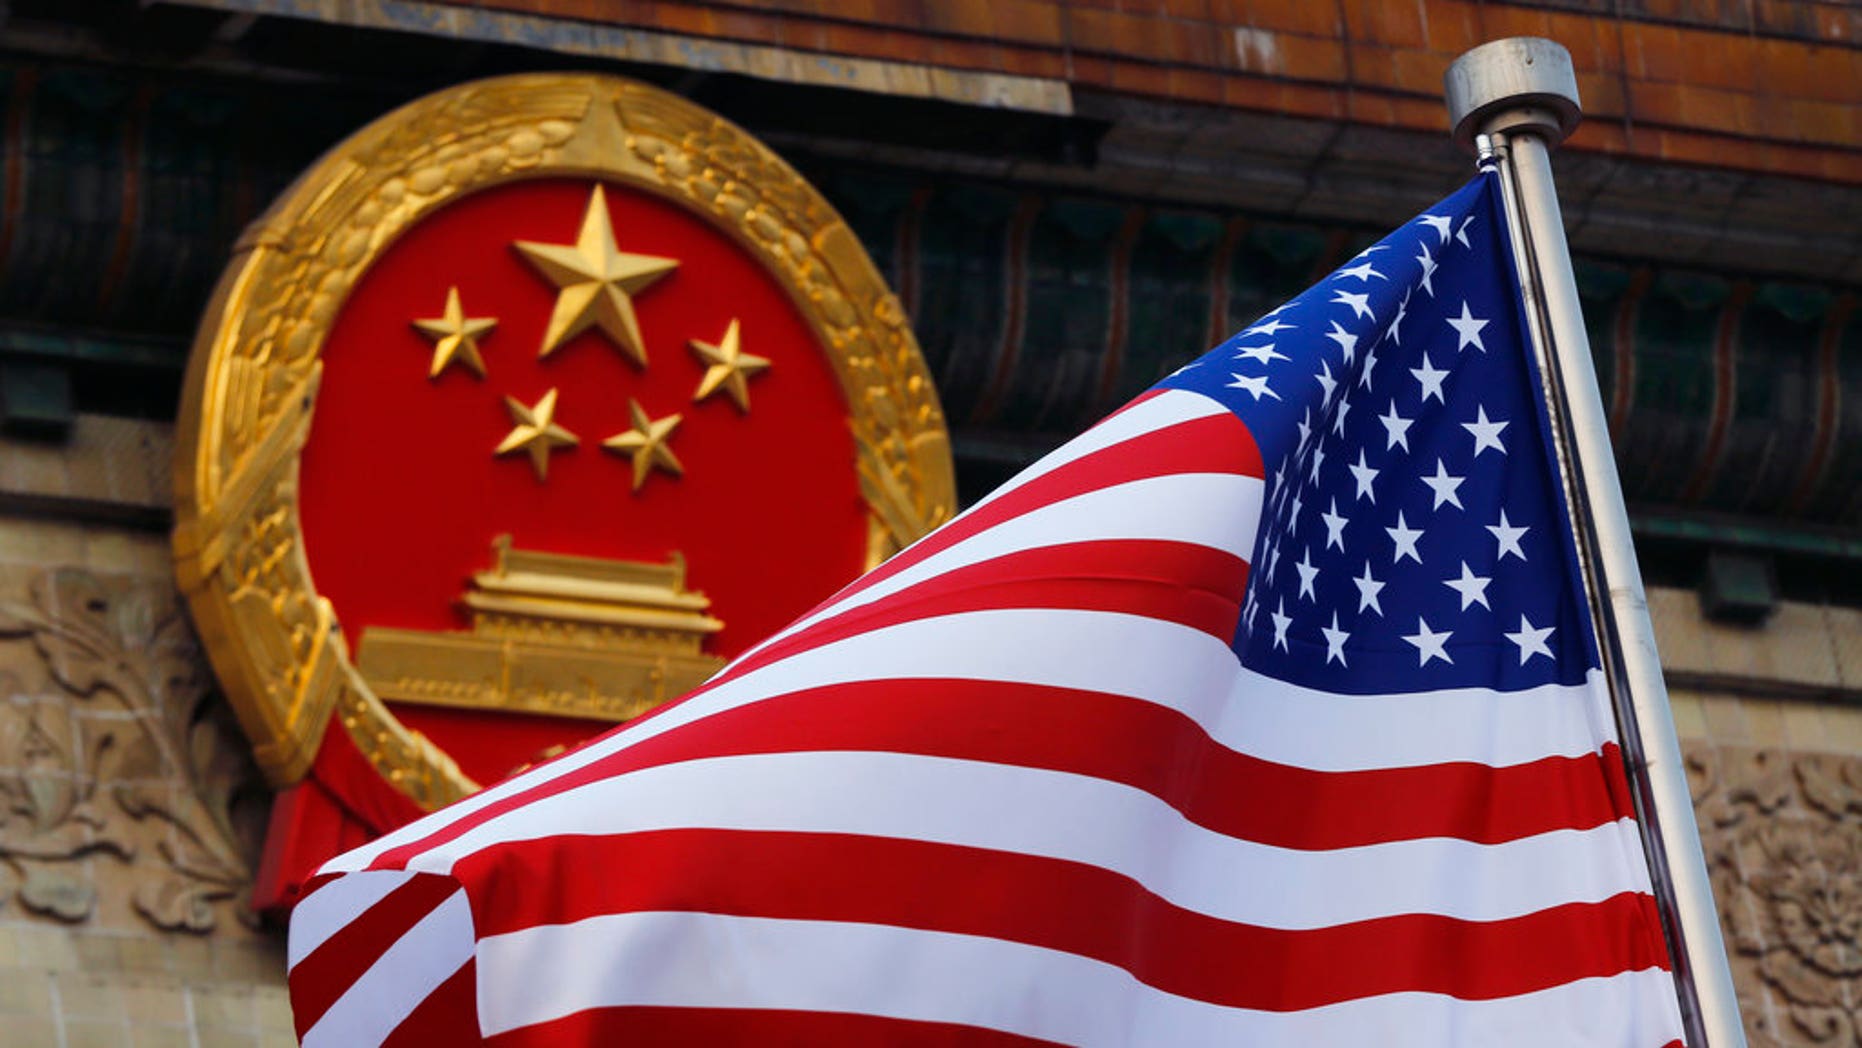 An American flag is flown next to the Chinese national emblem during a welcoming ceremony for visiting U.S. President Donald Trump outside the Great Hall of the People in Beijing.